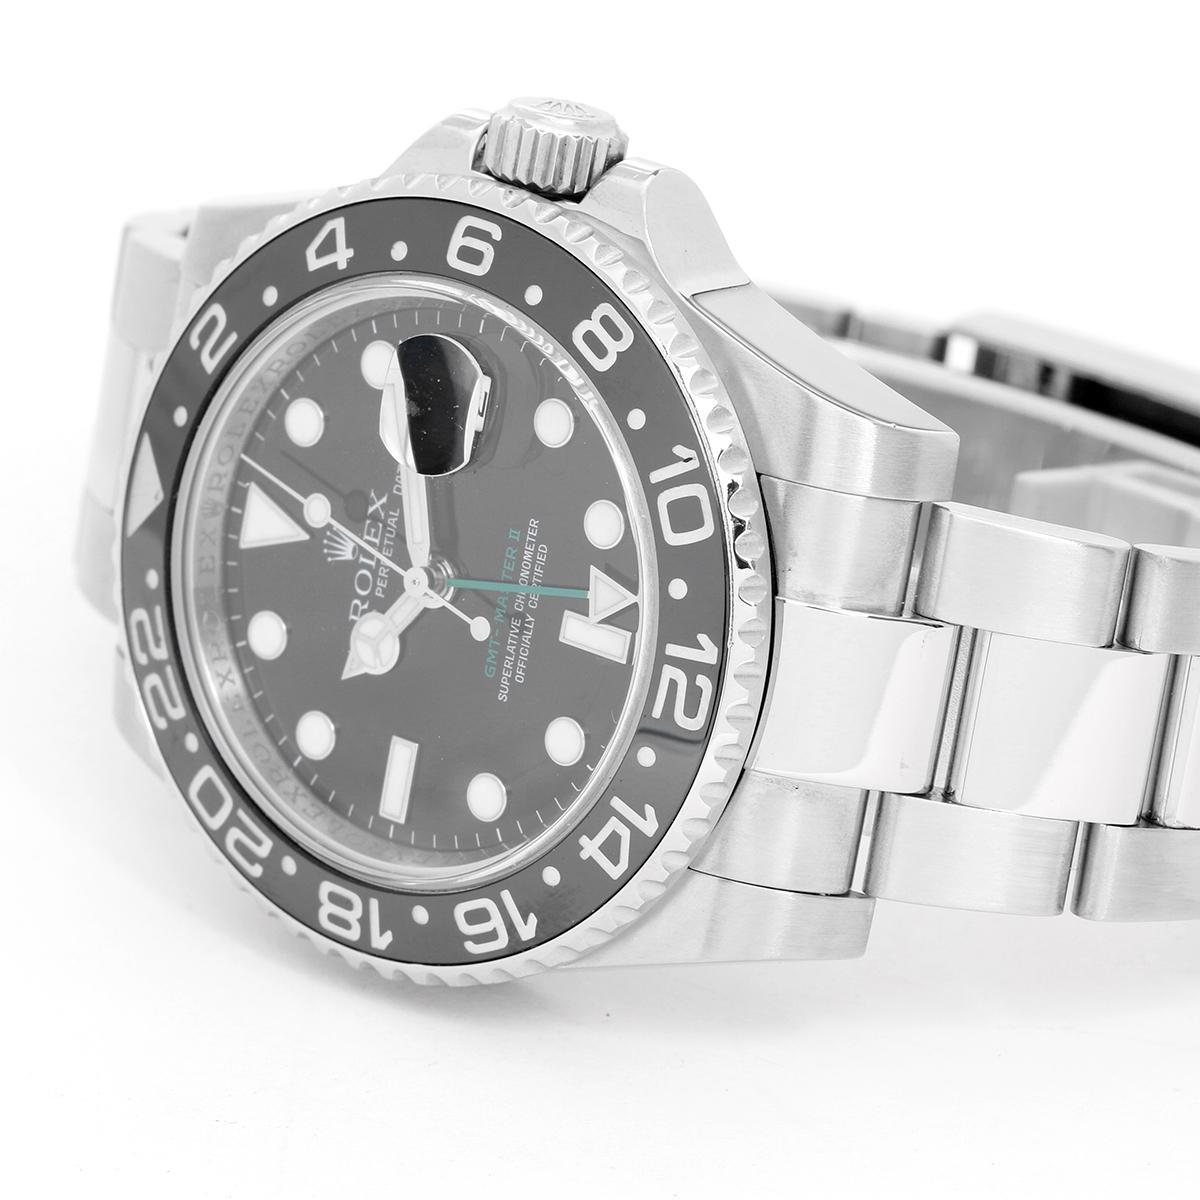 Men's Rolex GMT-Master II Watch 116710 ( 116710N ) - Automatic winding, 31 jewels. Stainless steel case with 24 hour ceramic bezel  ( 40 mm ) . Black dial with luminous markers; green GMT hand. Stainless steel Oyster bracelet with flip-lock clasp.